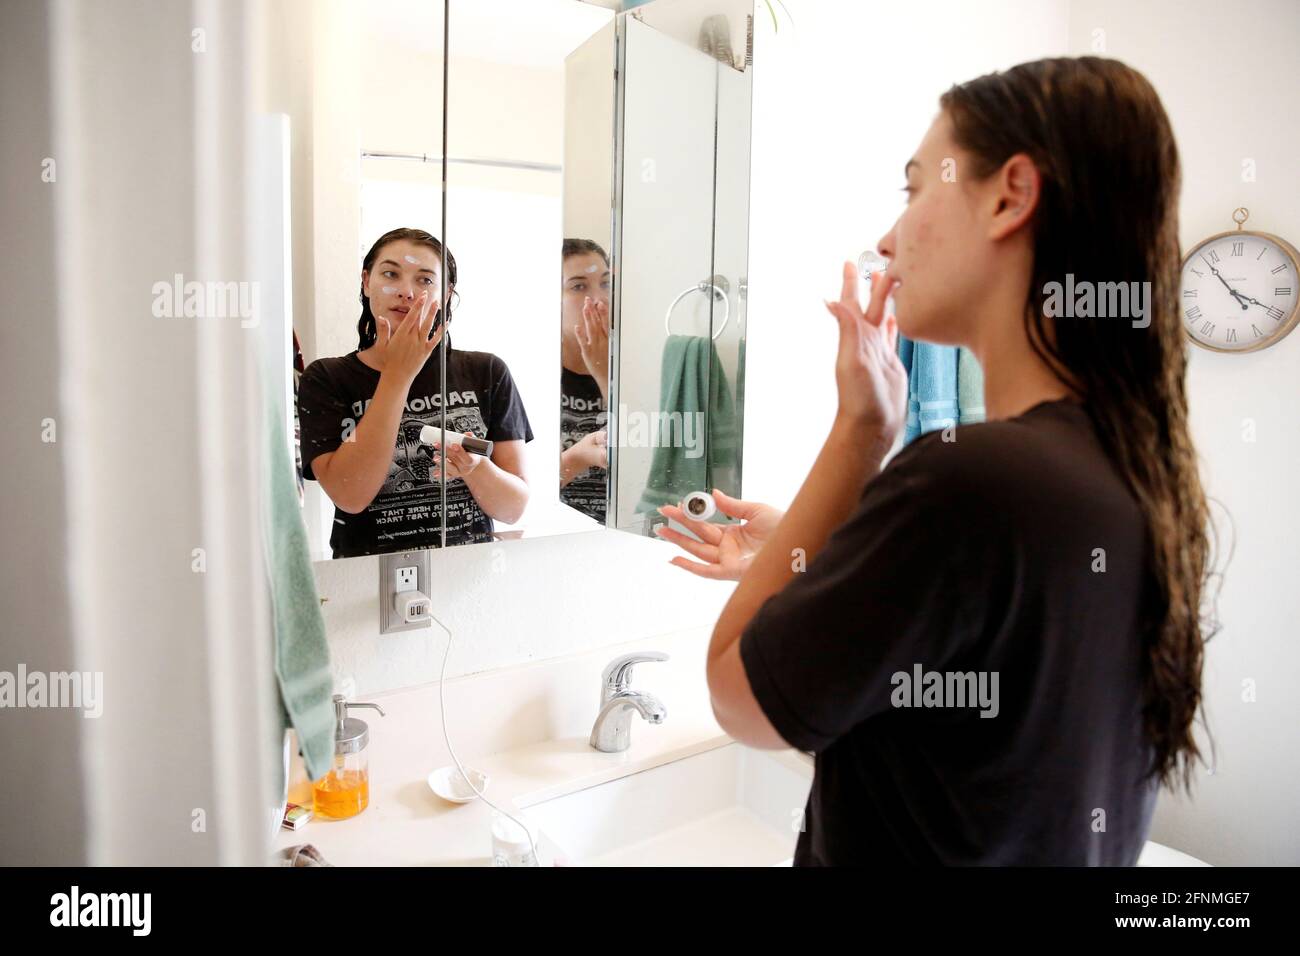 Savannah Rain, an Oakland-based stripper, puts on her makeup at her home in  Oakland, California, before going to work at San Francisco's Gold Club Strip  Club on May 14, 2021. Picture taken